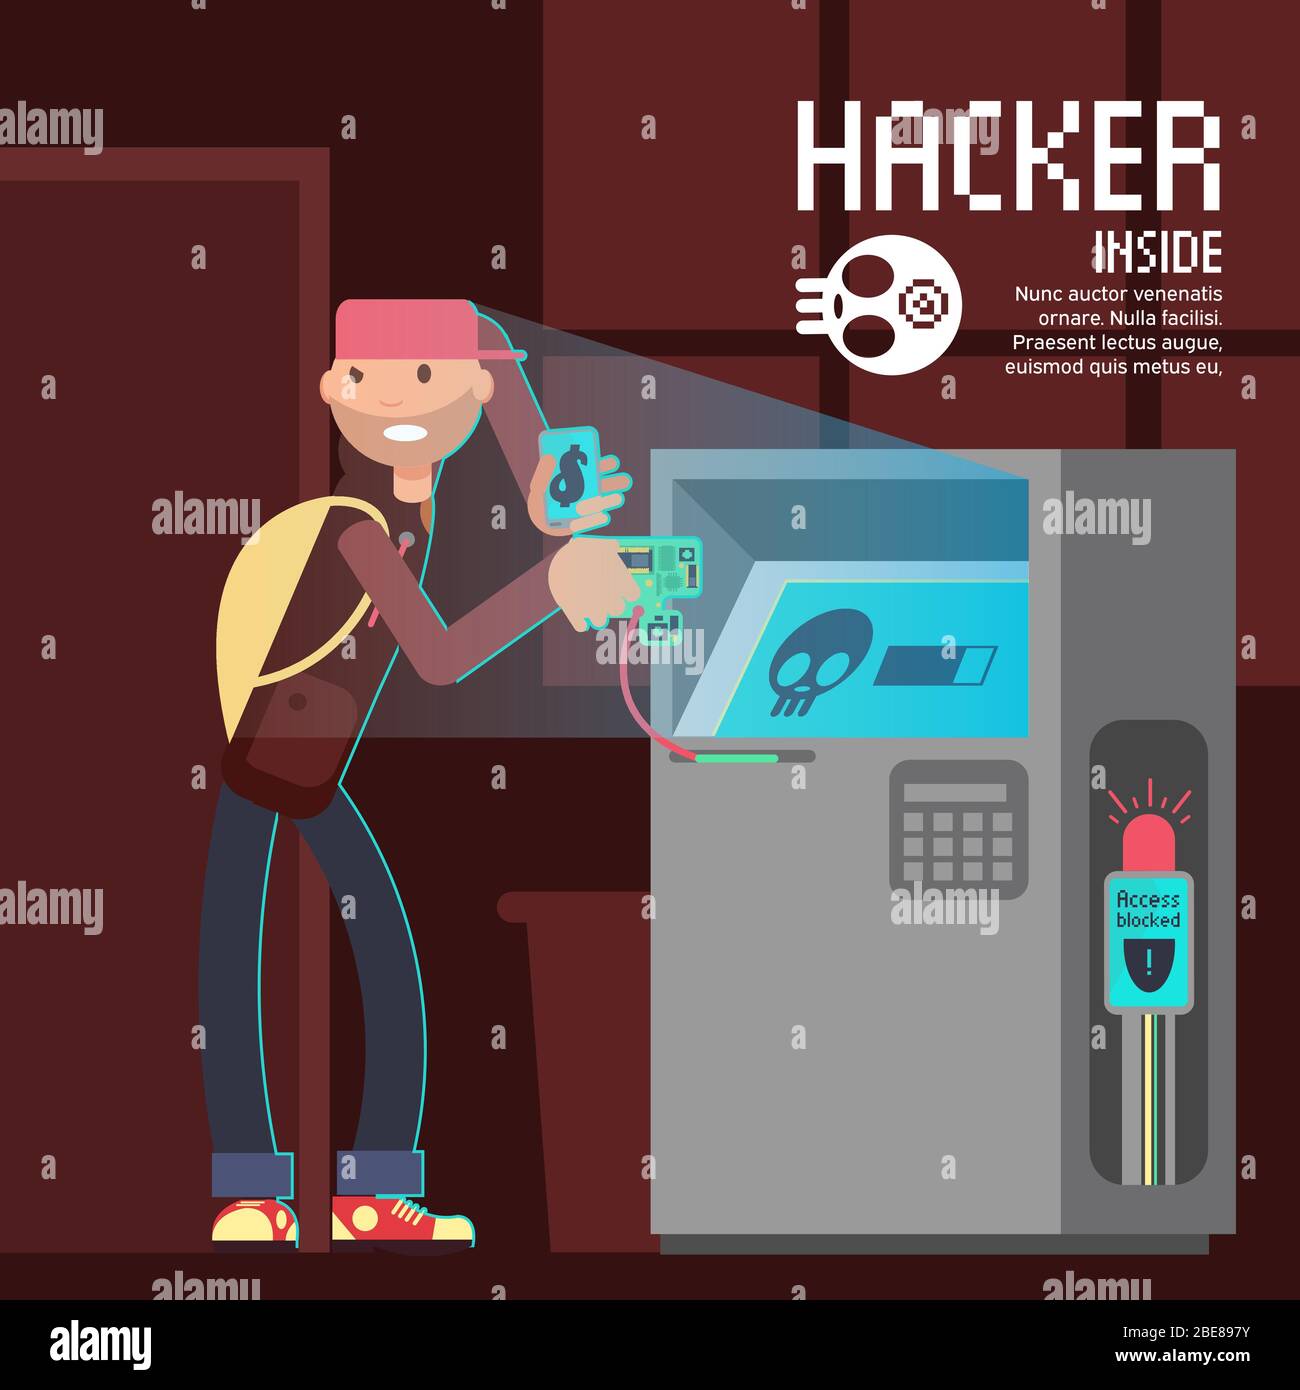 Computer safety and computer crime vector concept with cartoon hacker character. Crime and thief atm hacker illustration Stock Vector